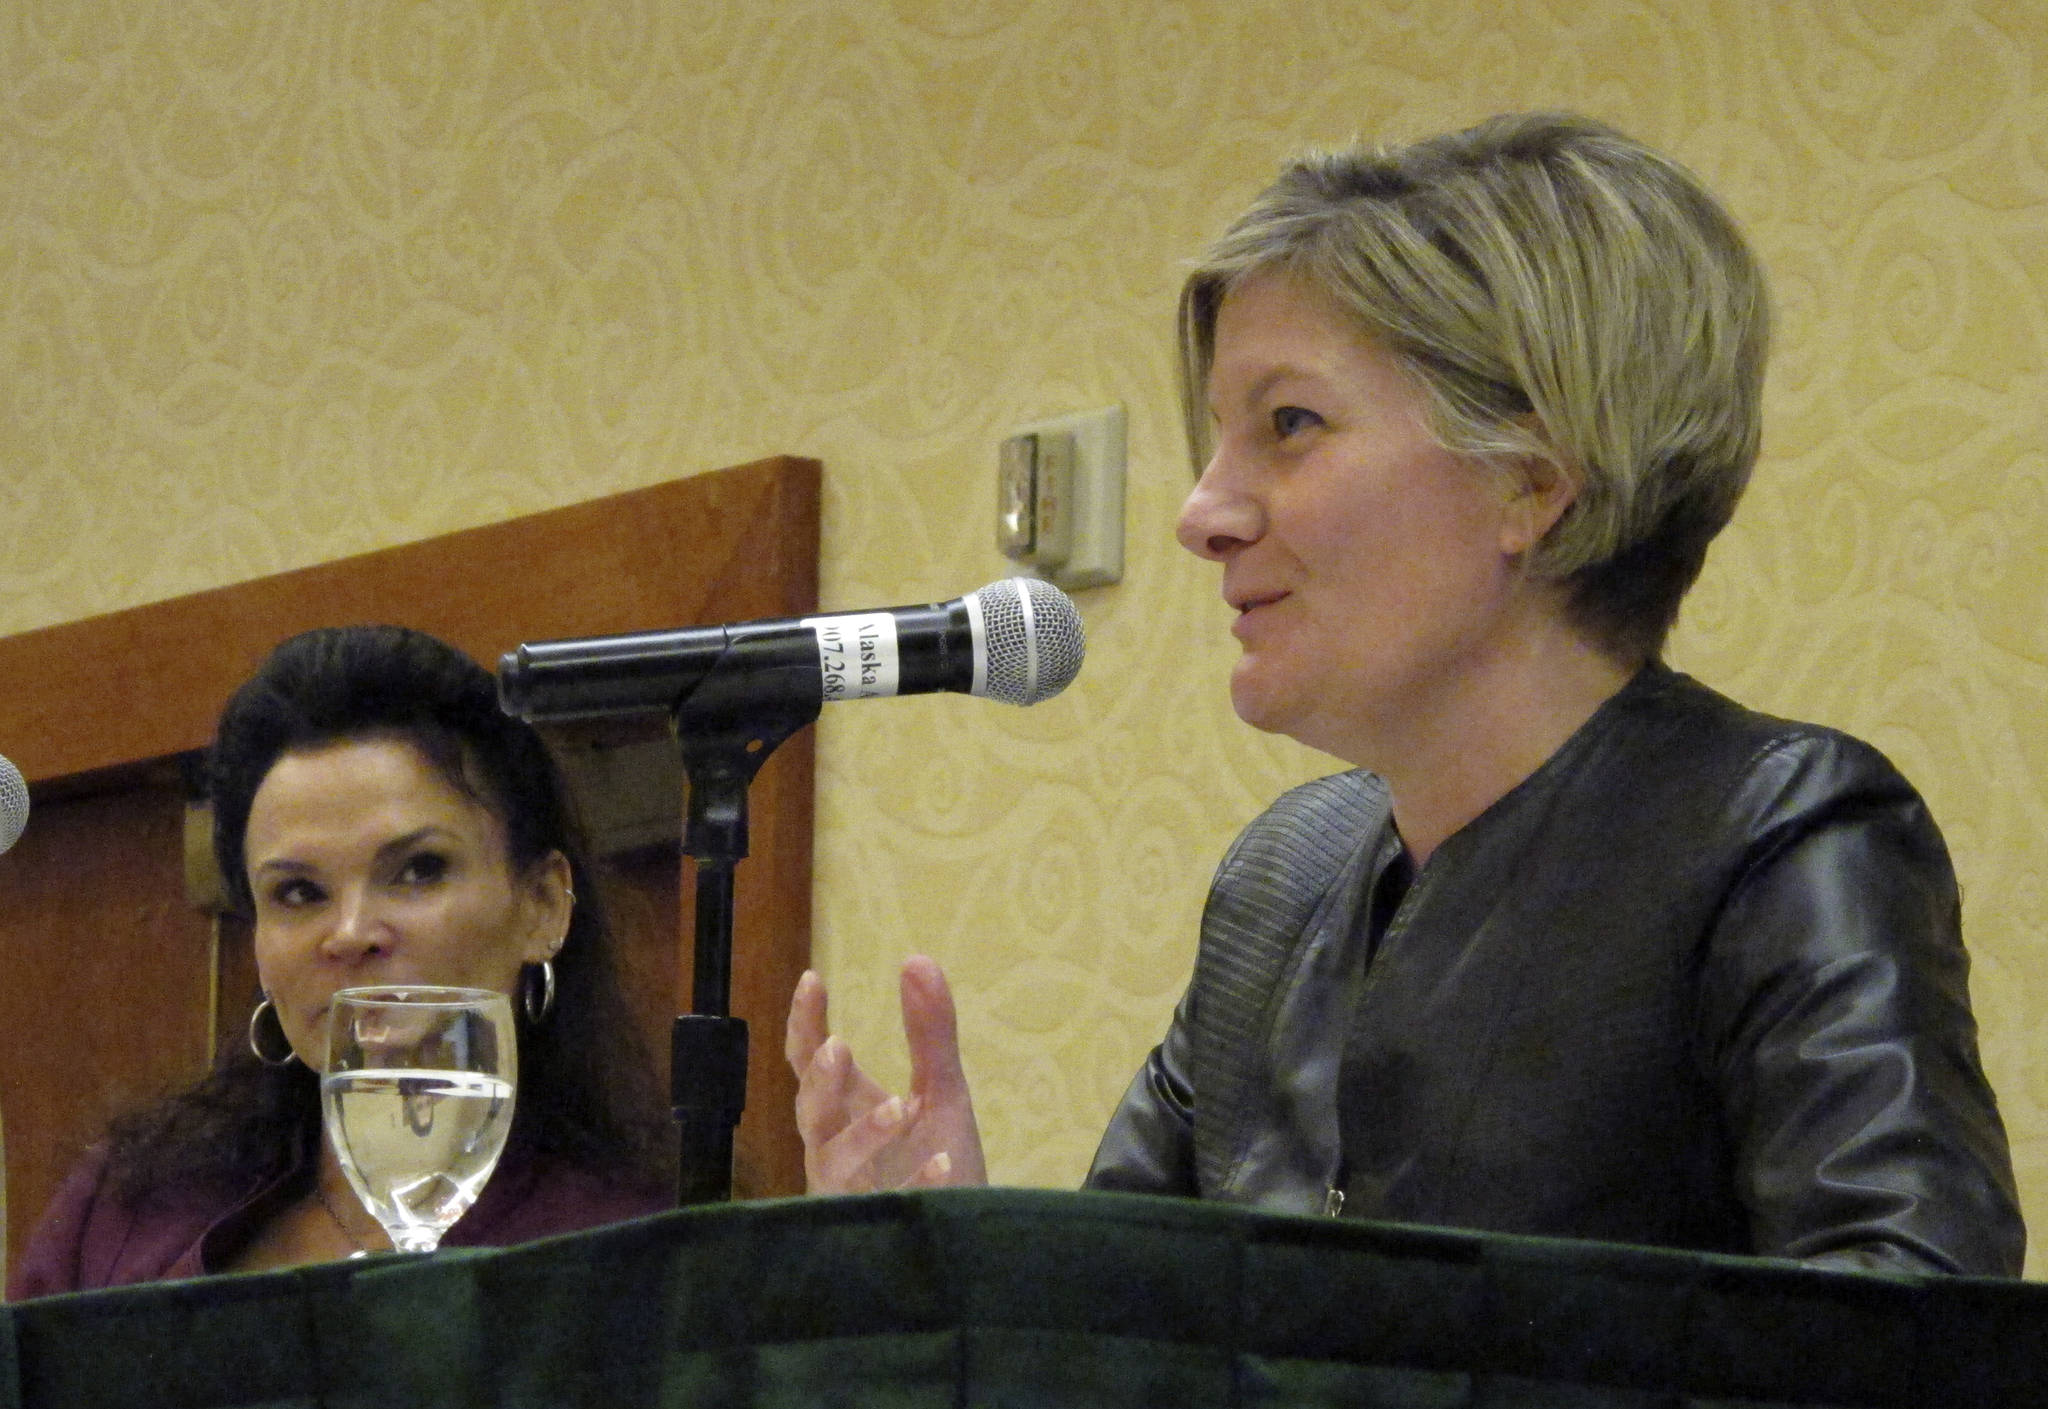 Alaska State Attorney General Jahna Lindemuth, right, speaks at the Alaska Native Law Conference Tuesday in Anchorage as Jana Turvey looks on. Lindemuth outlined the state’s position on the traditional form of tribal justice known as banishment. (AP Photo/Rachel D’Oro)